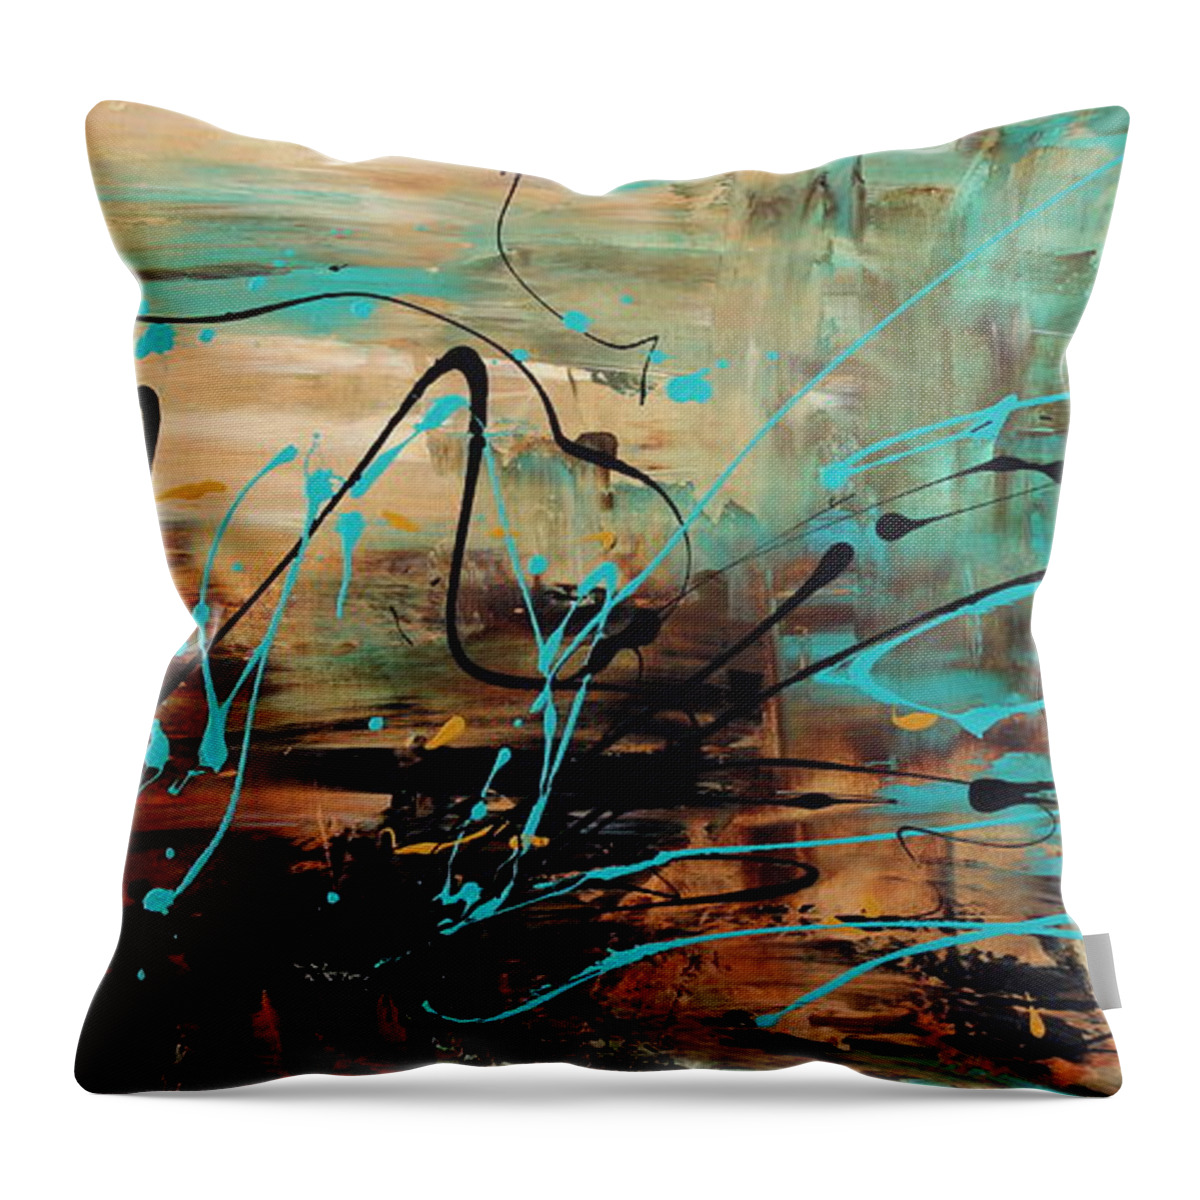 Contemporary Paintings Throw Pillow featuring the painting Sound Effect by Preethi Mathialagan